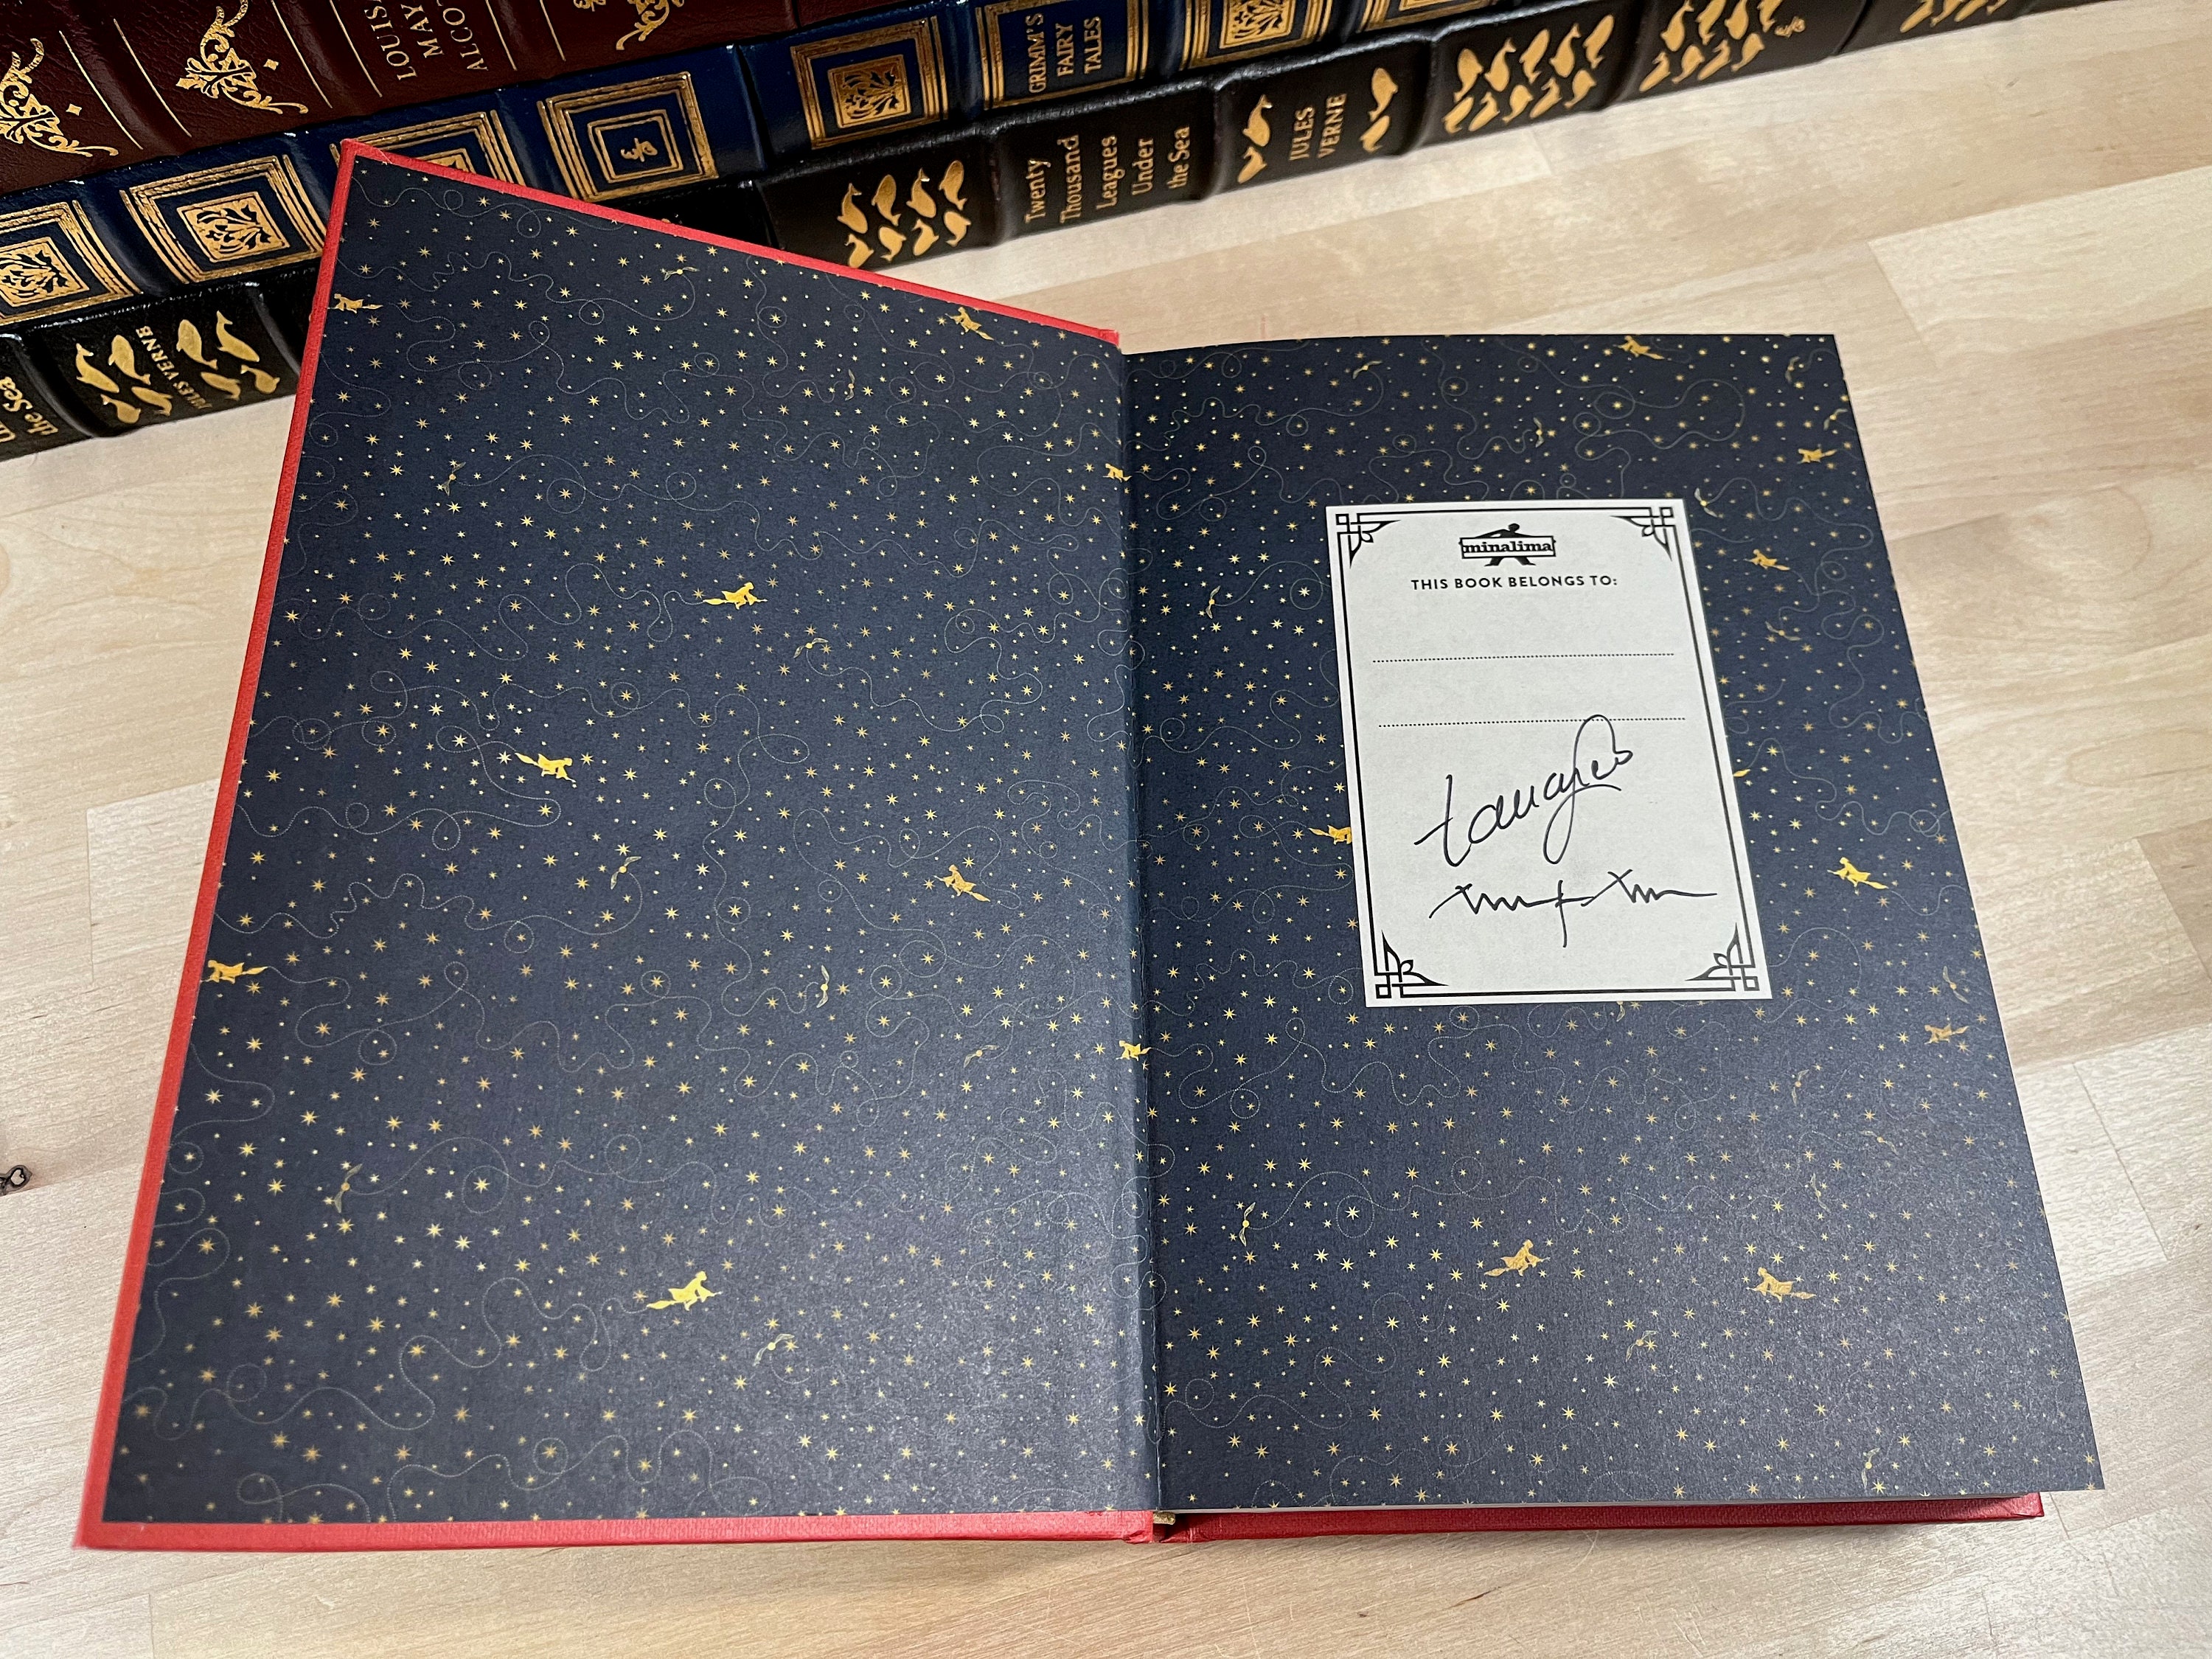 Signed, Harry Potter and the Sorcerer's Stone by J.K. Rowling, Signed  Interactive Edition by Minalima -  Hong Kong